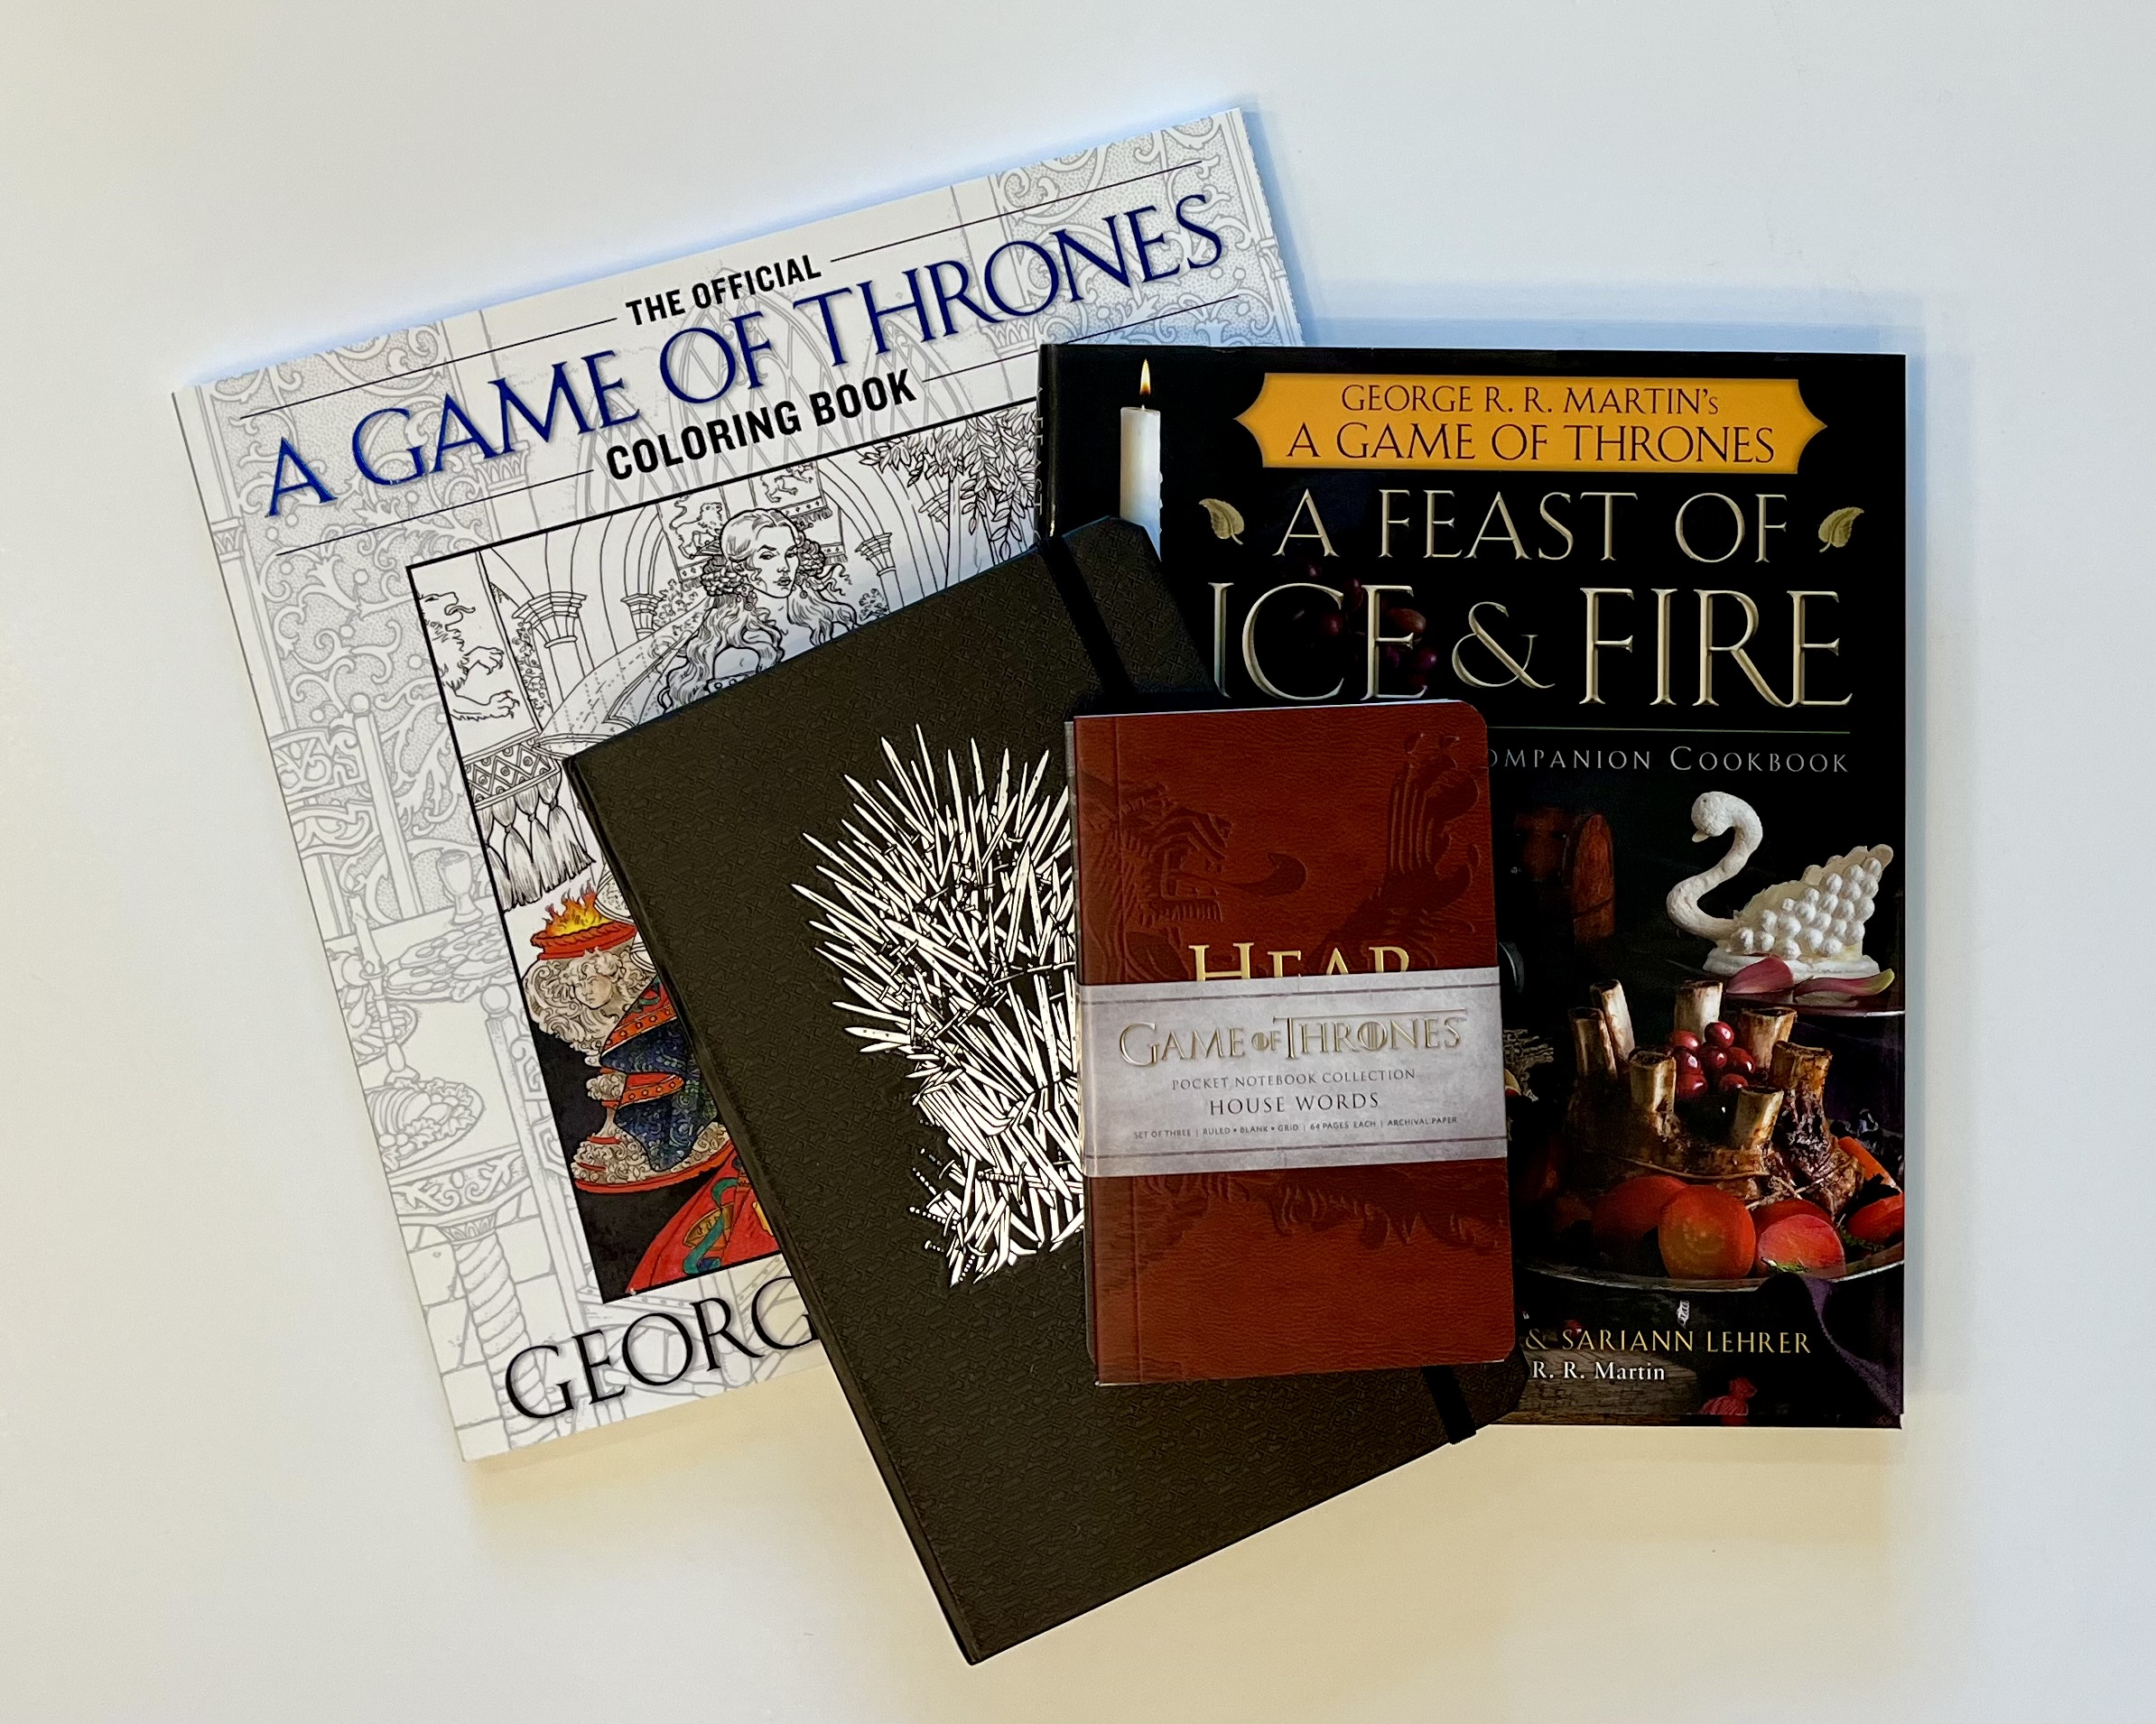 a Game of Thrones coloring book, cookbook, and notebooks